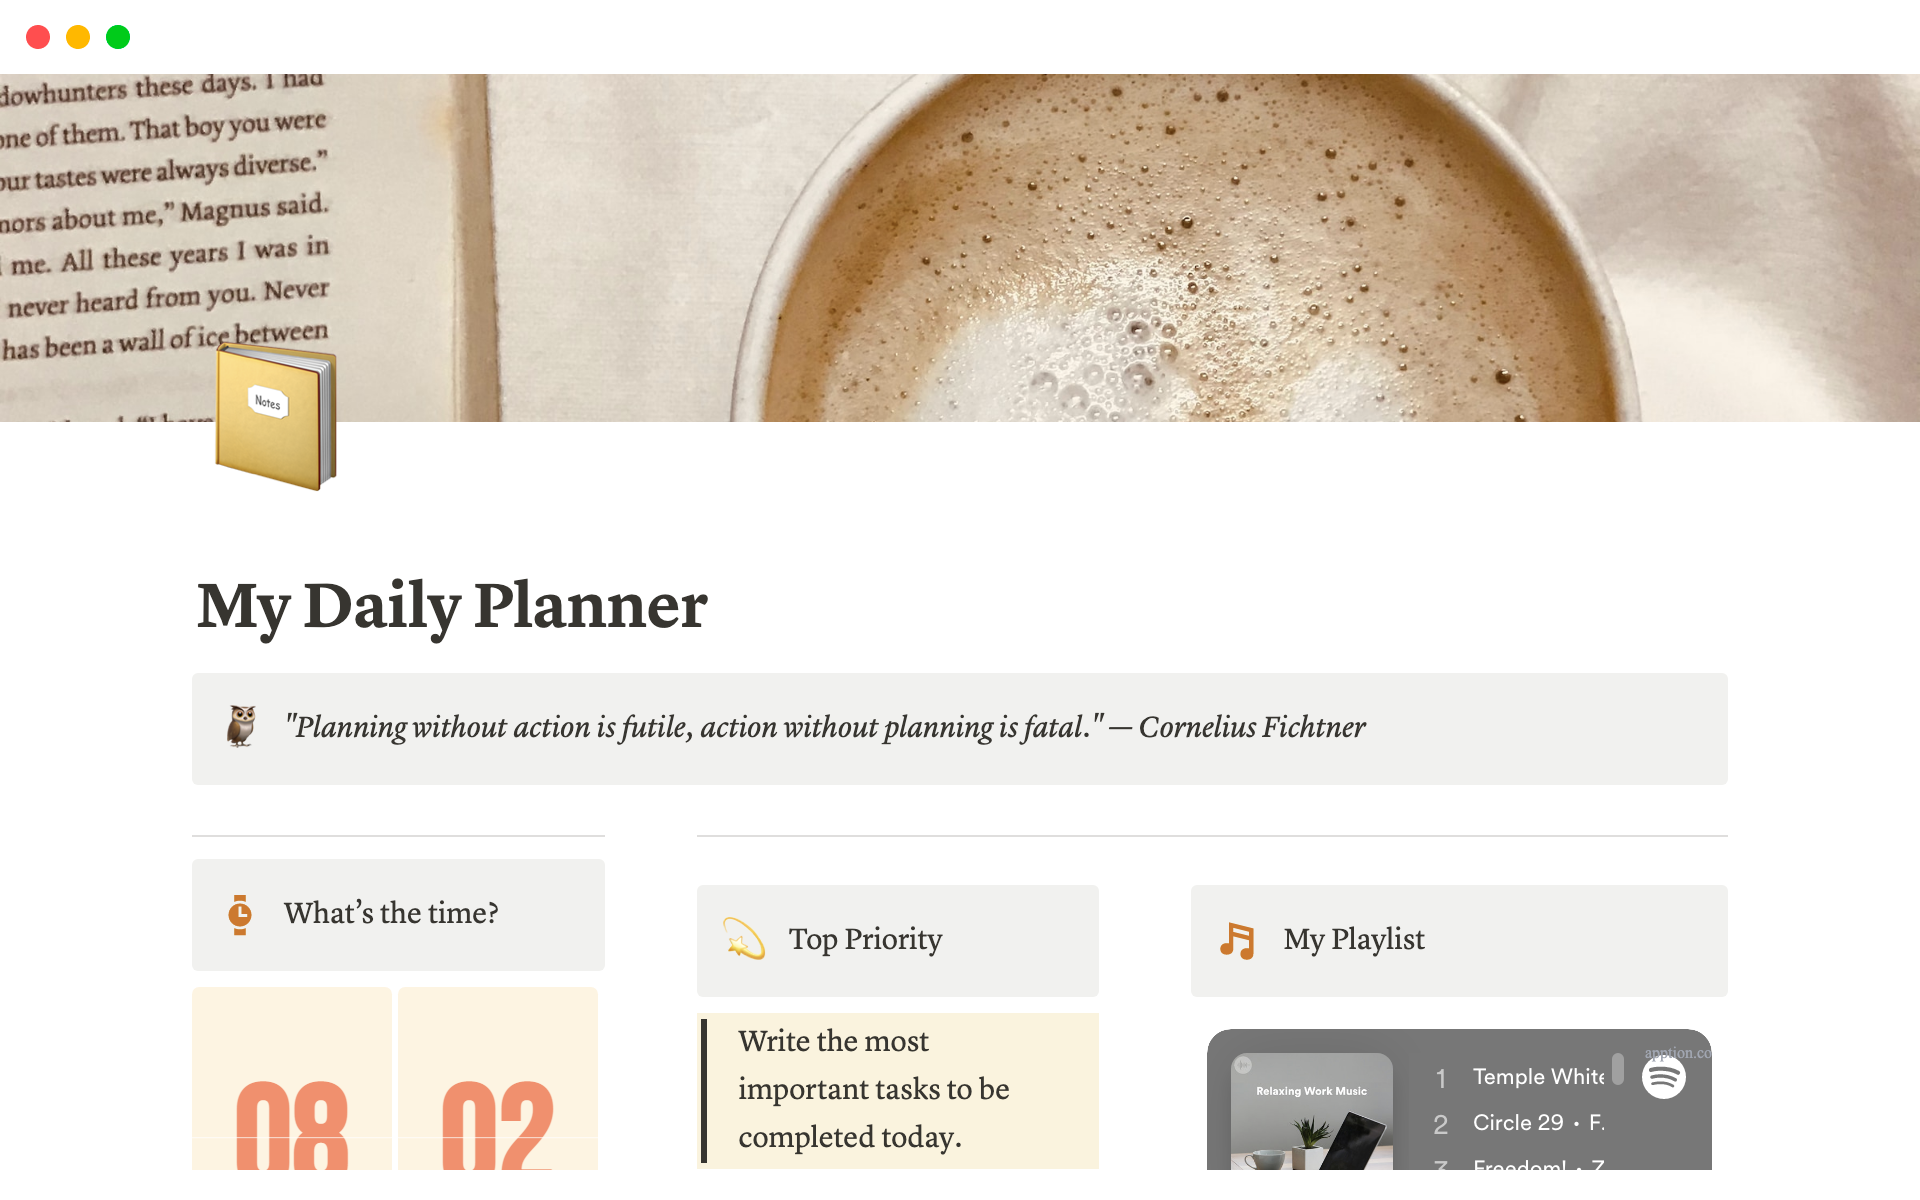 The planner helps individuals to organize their day without overthinking